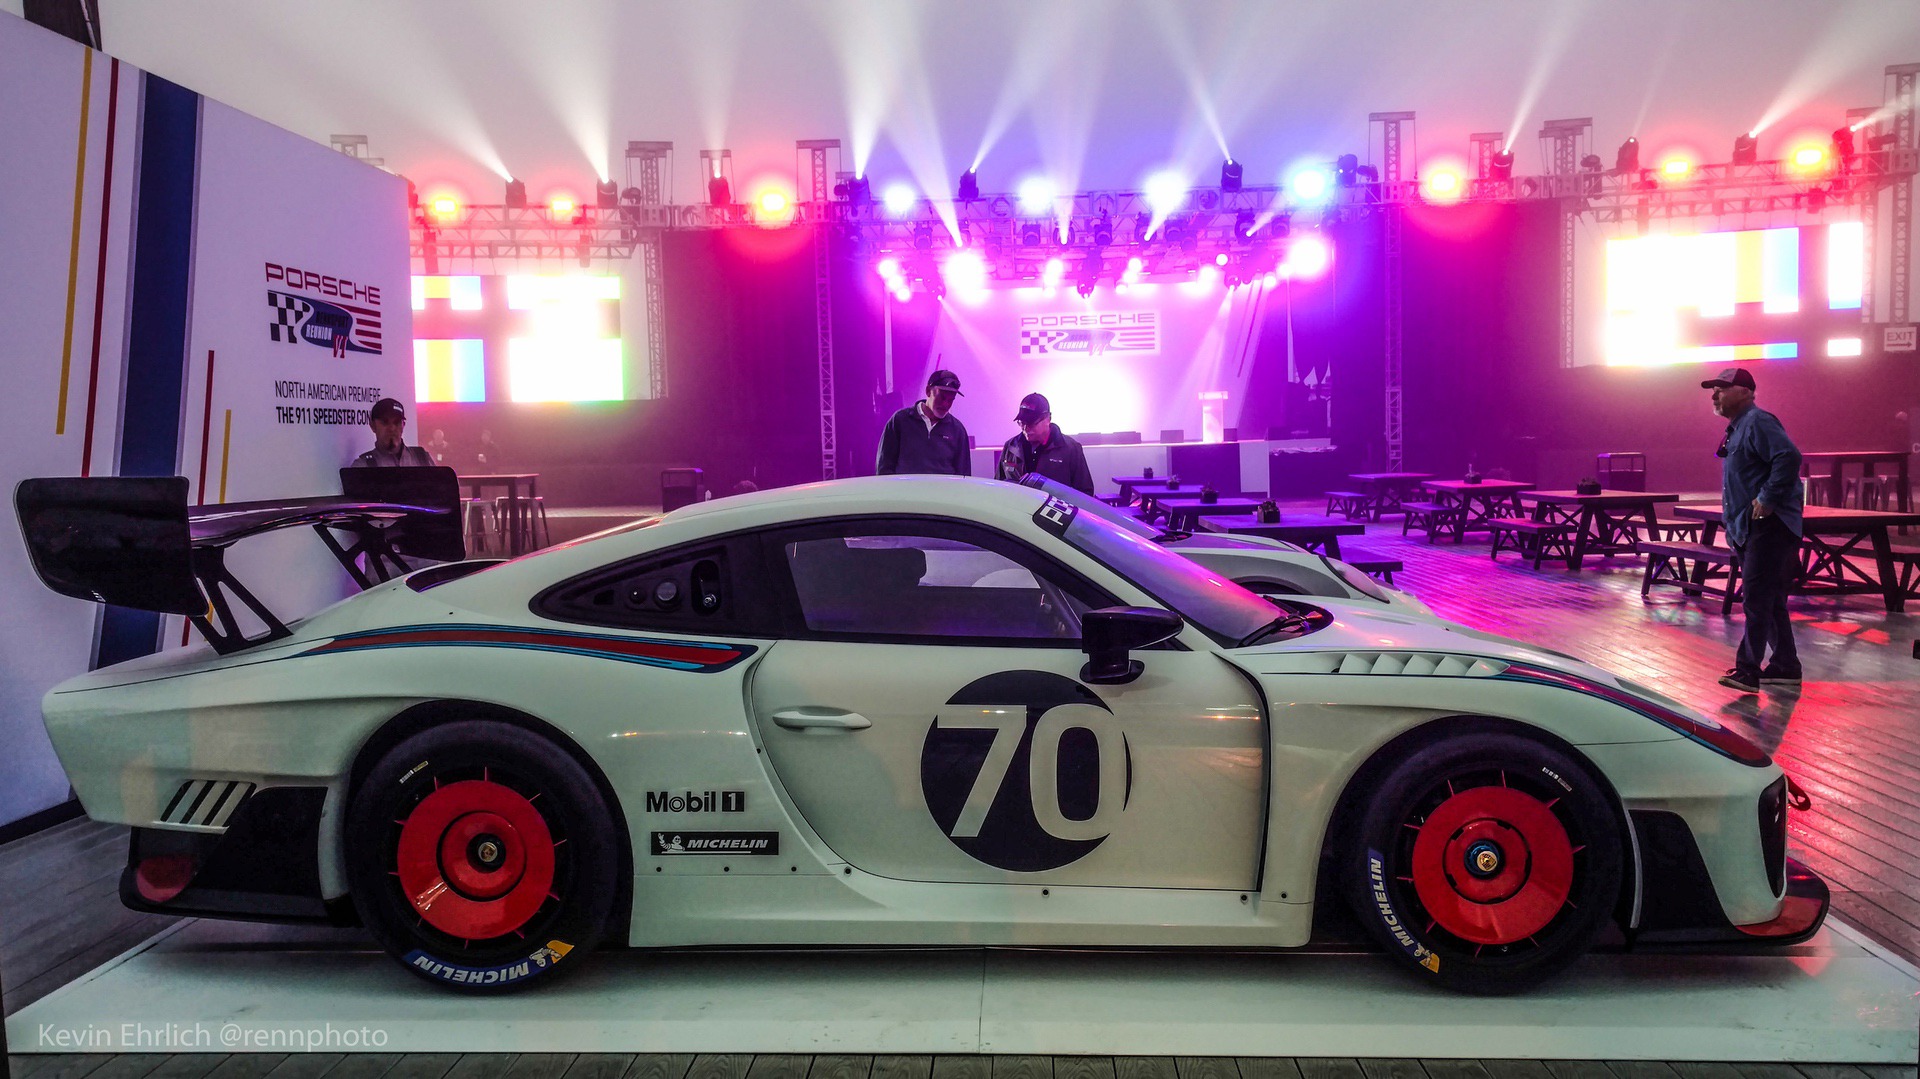 Side view of Porsche 935/19 at event with neon lights in background